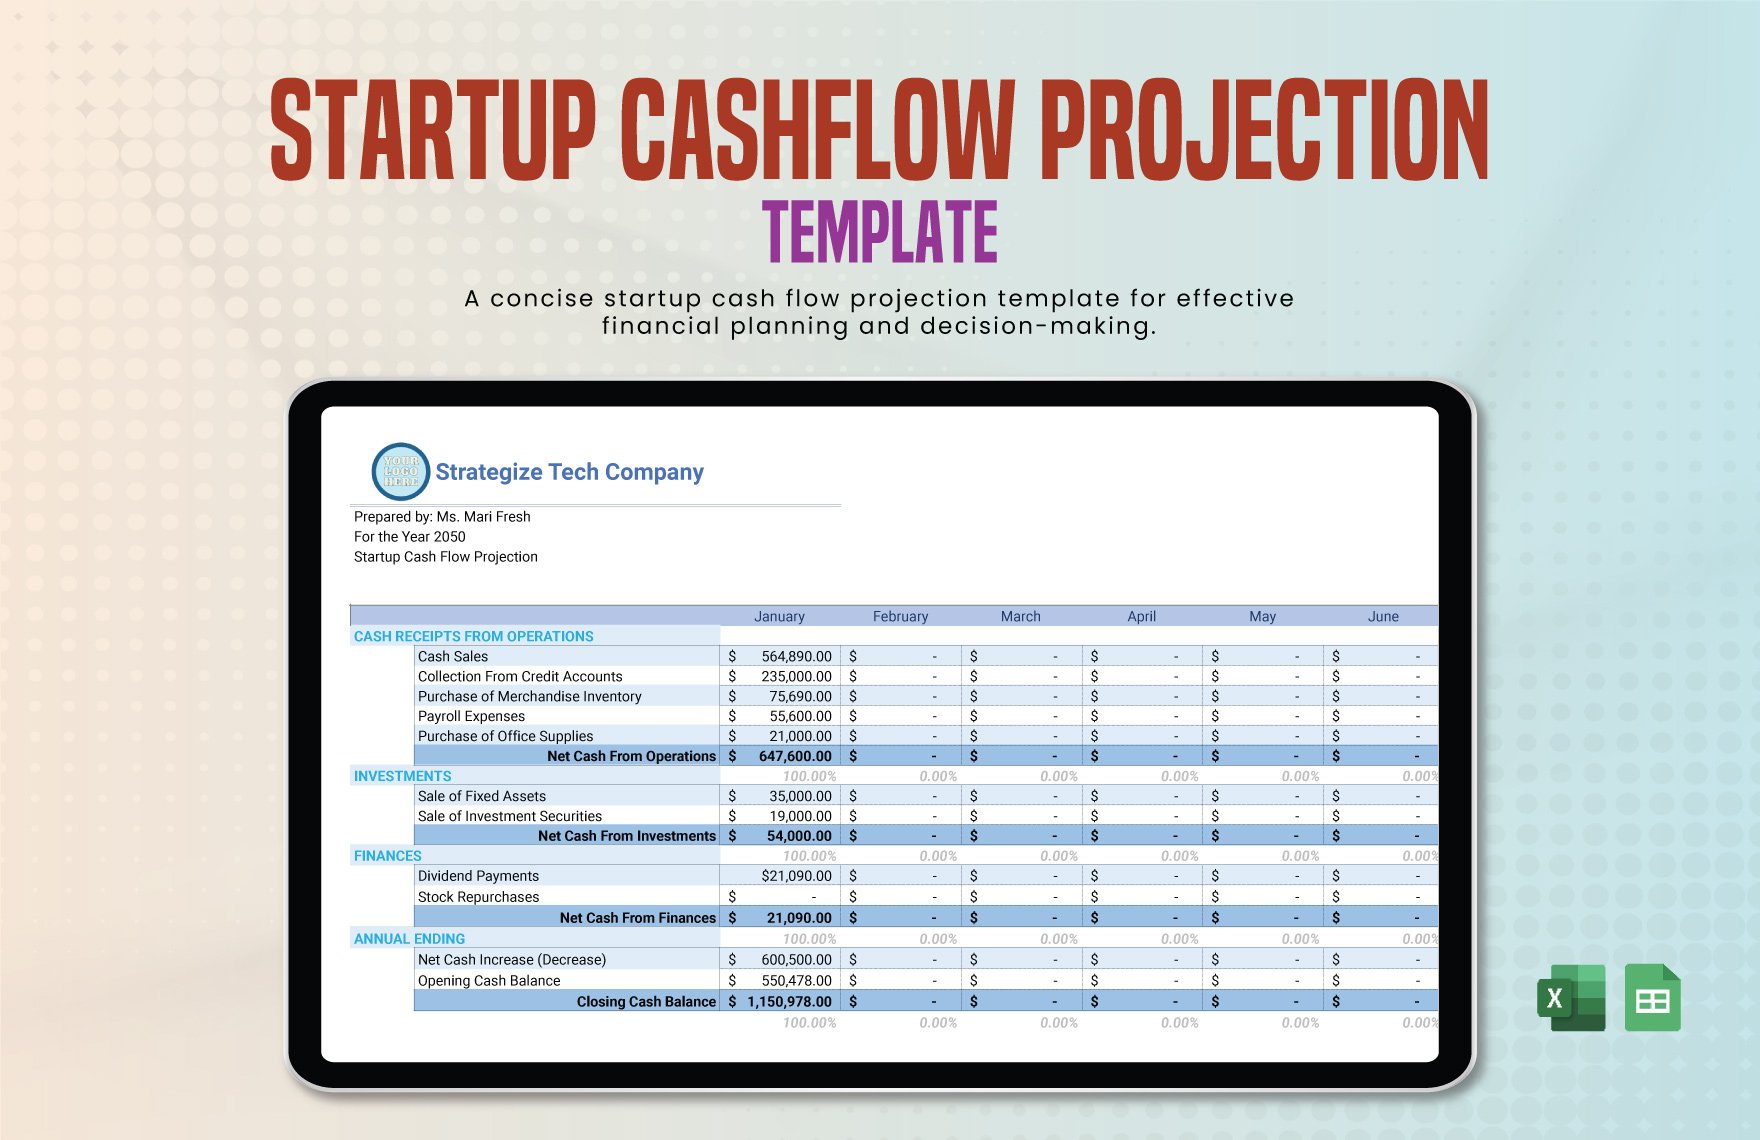 Startup CashFlow Projection Template